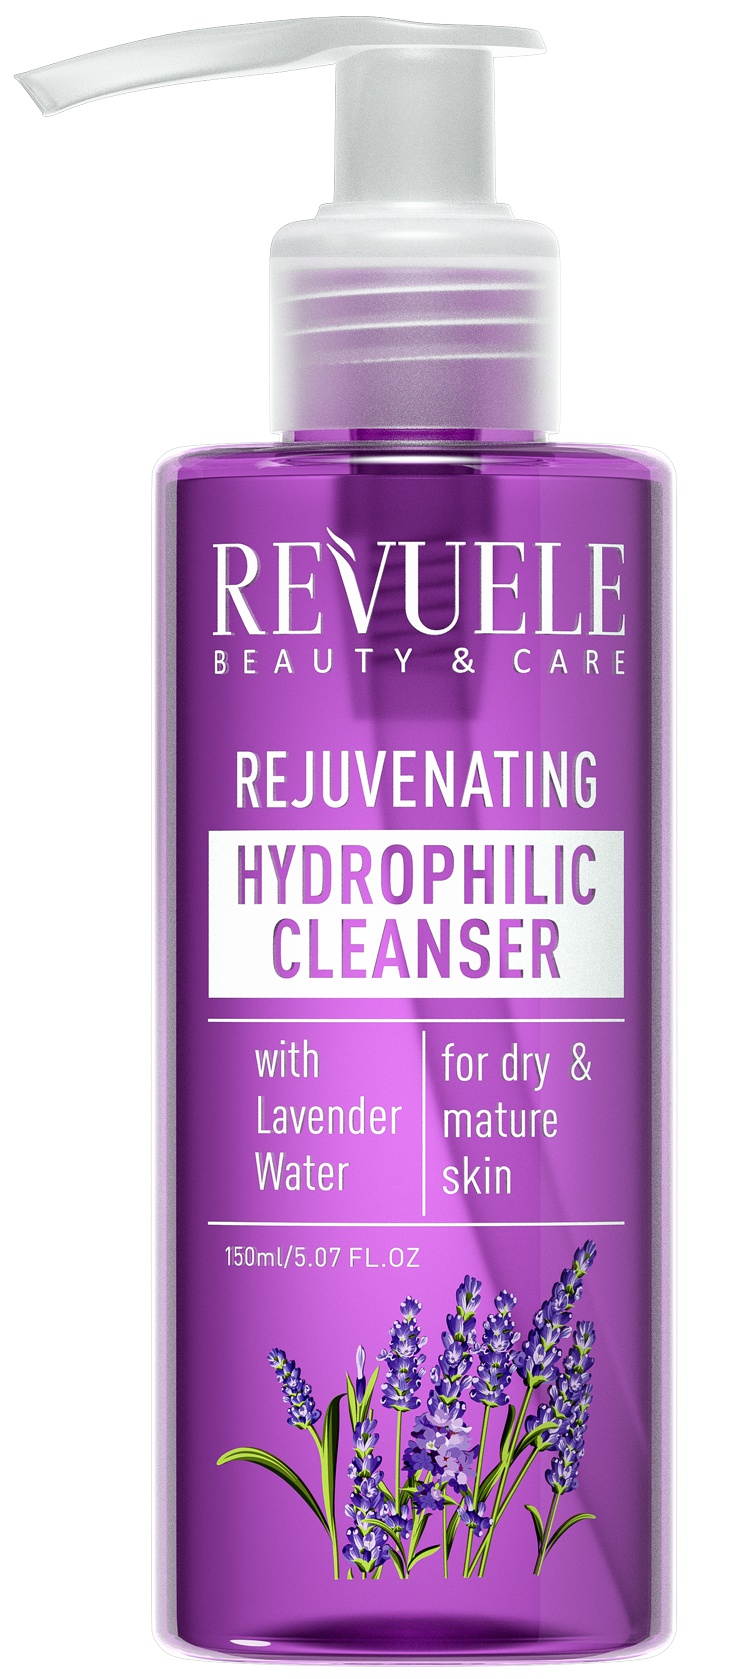 Revuele Rejuvenating Hydrophilic Cleanser With Lavender Water